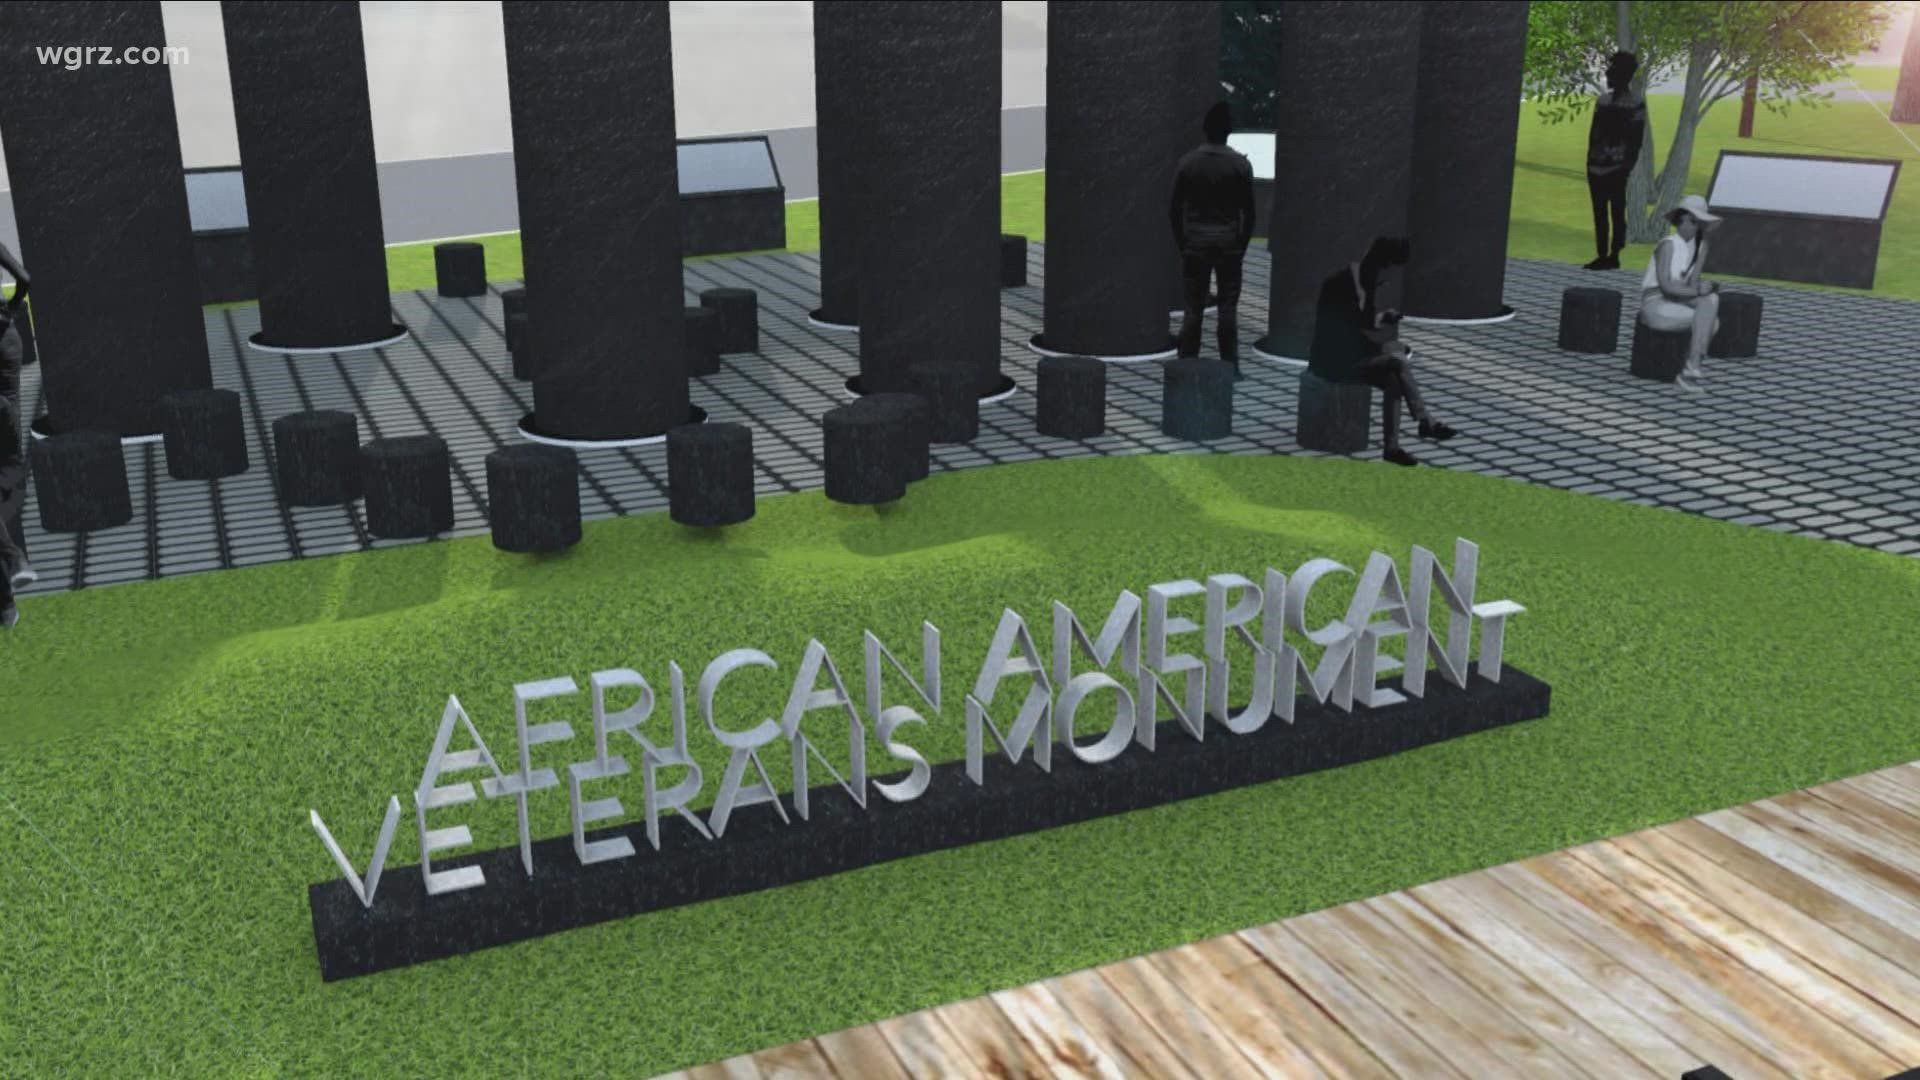 The African American Veterans monument will be the first of its kind, celebrating veterans who served despite the discrimination they faced.